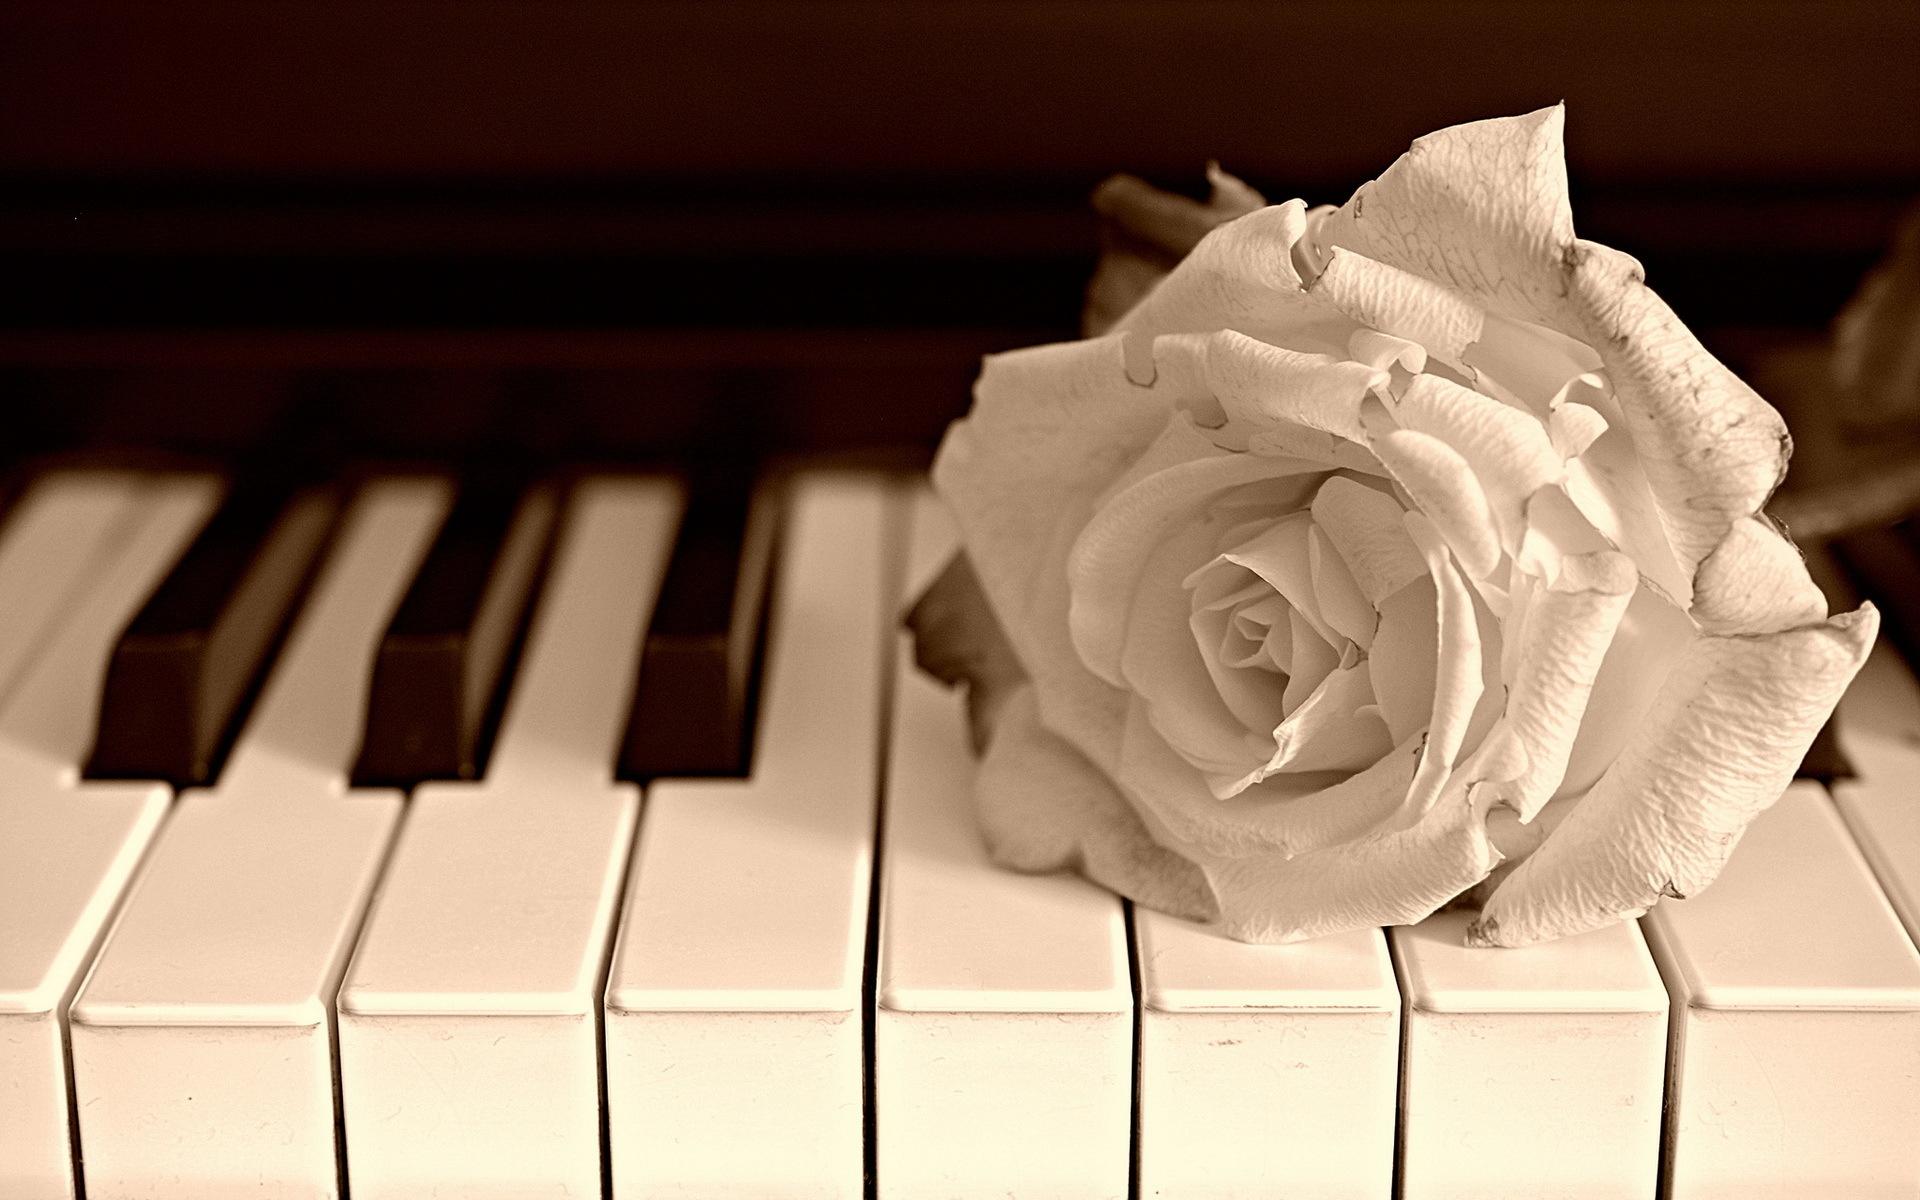 Free download Piano Wallpaper Wallpaper High Definition High